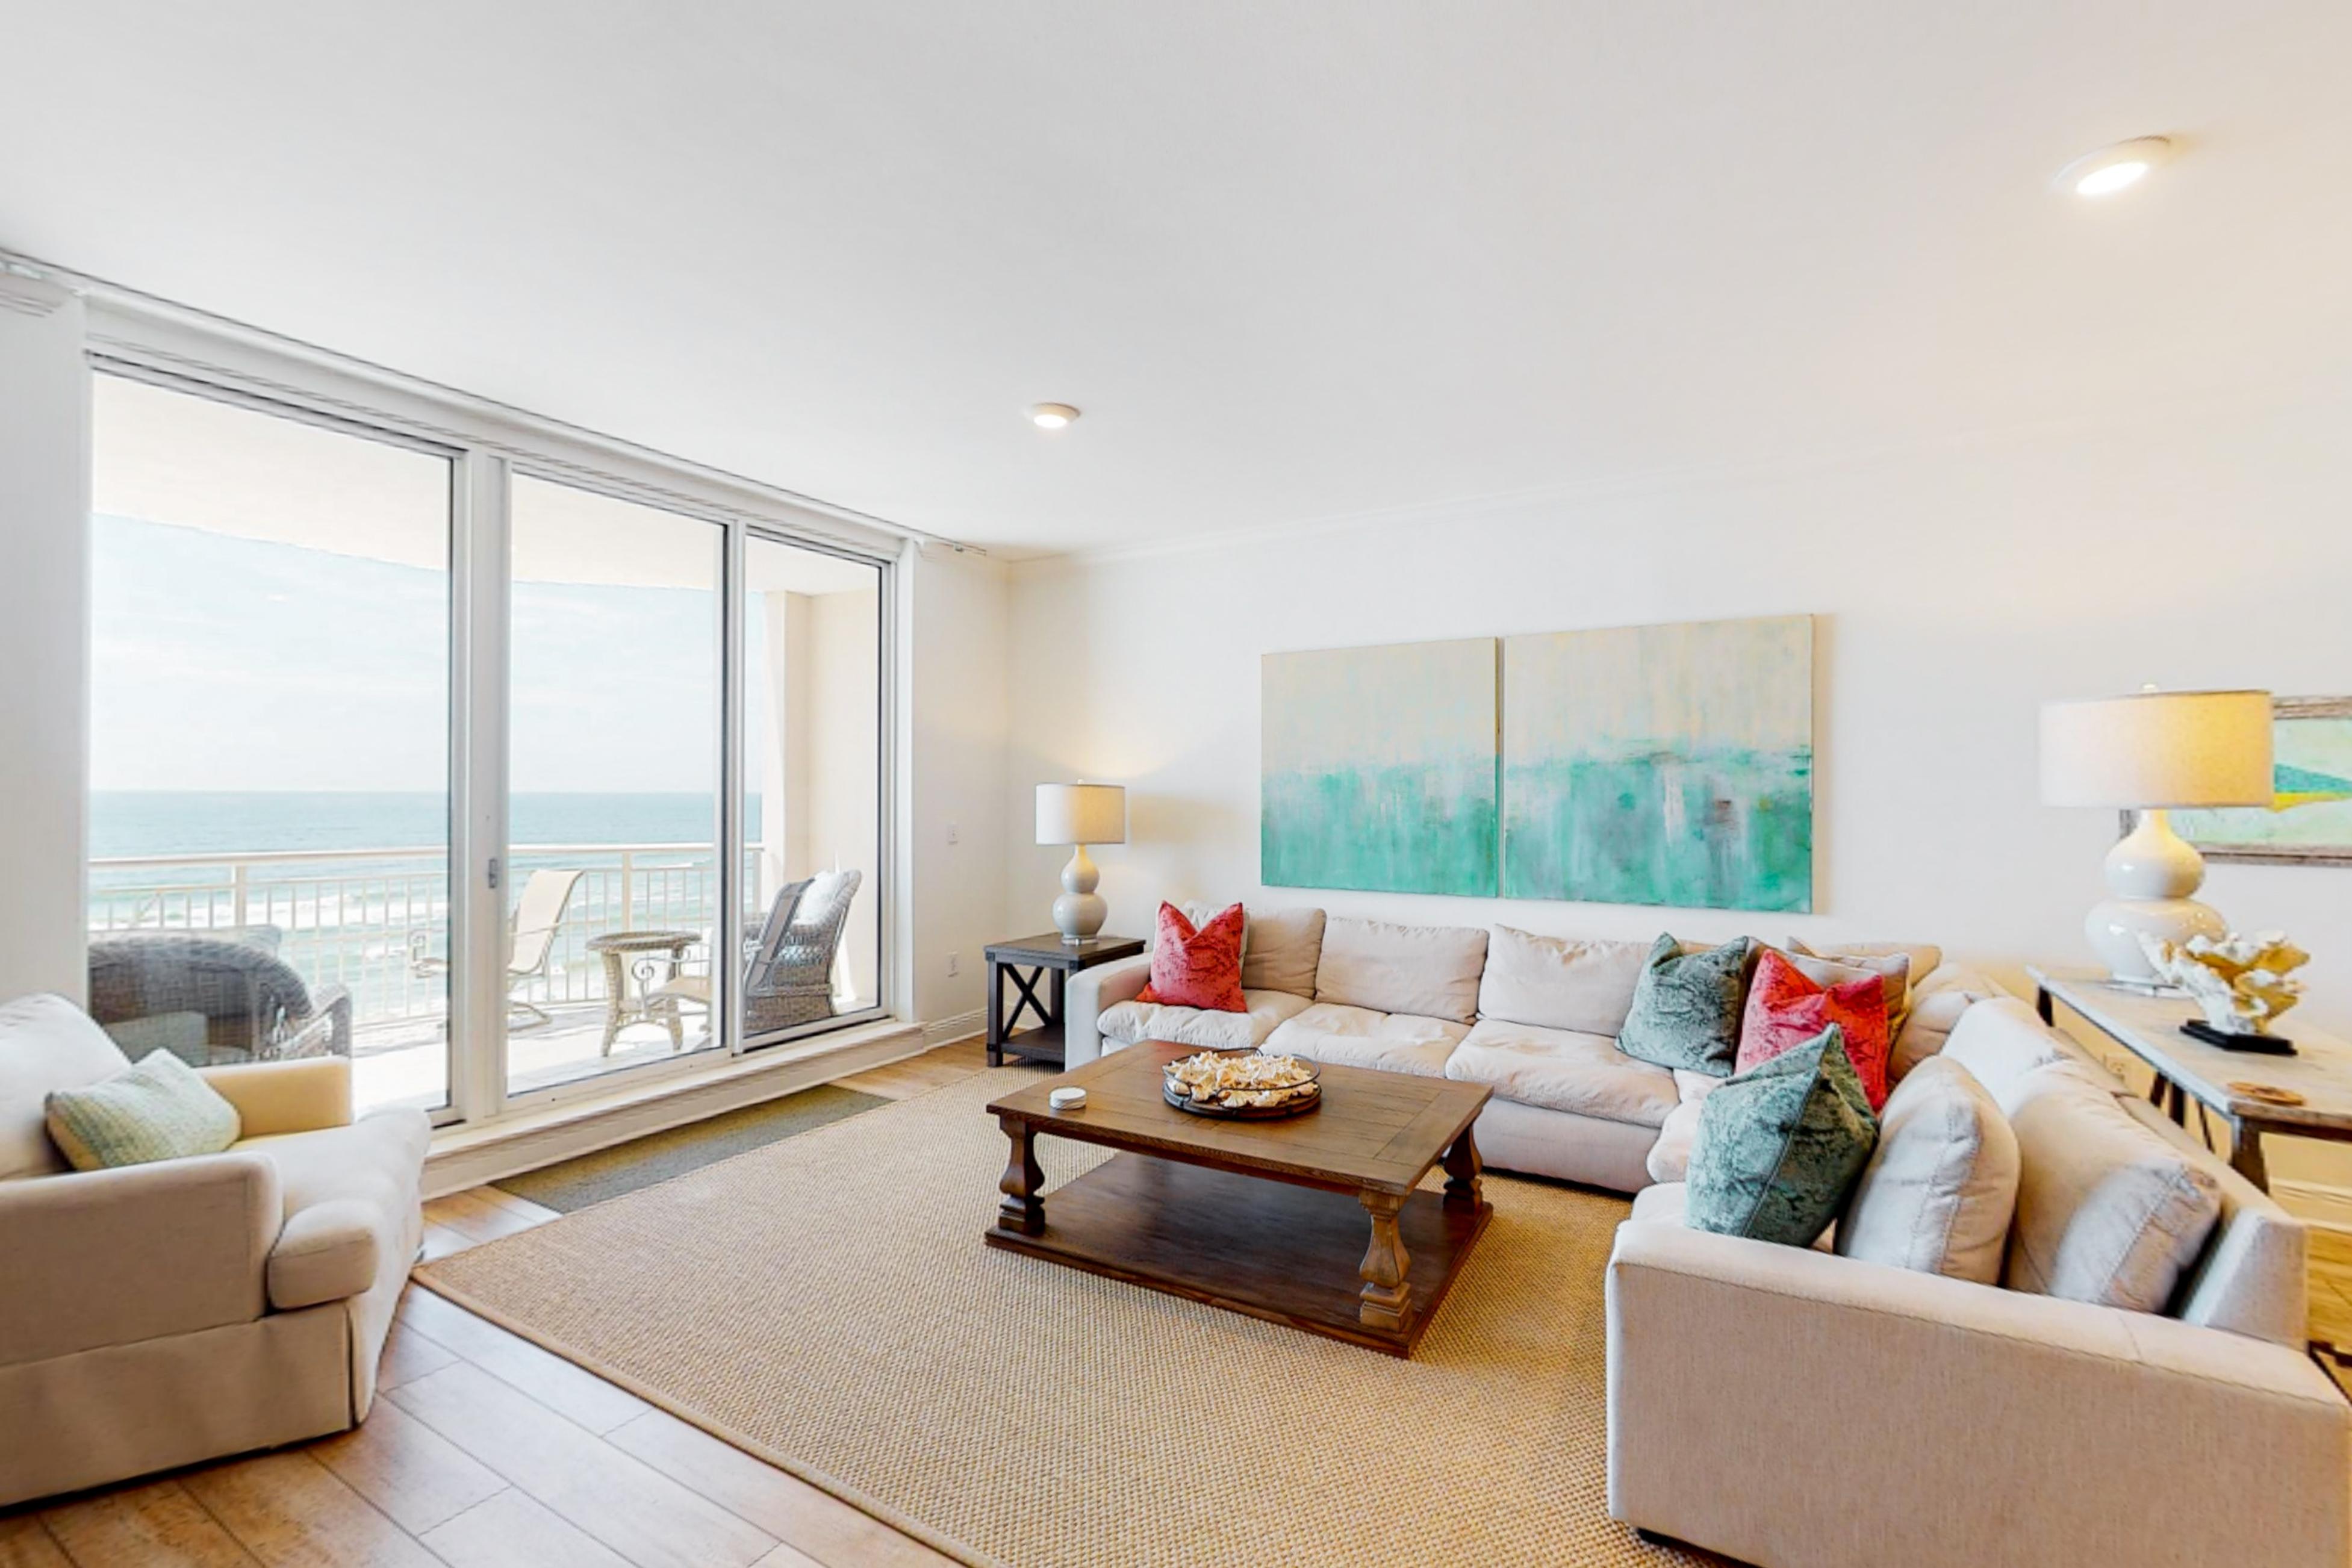 Property Image 1 - Newly Renovated Condo with Gulf Views